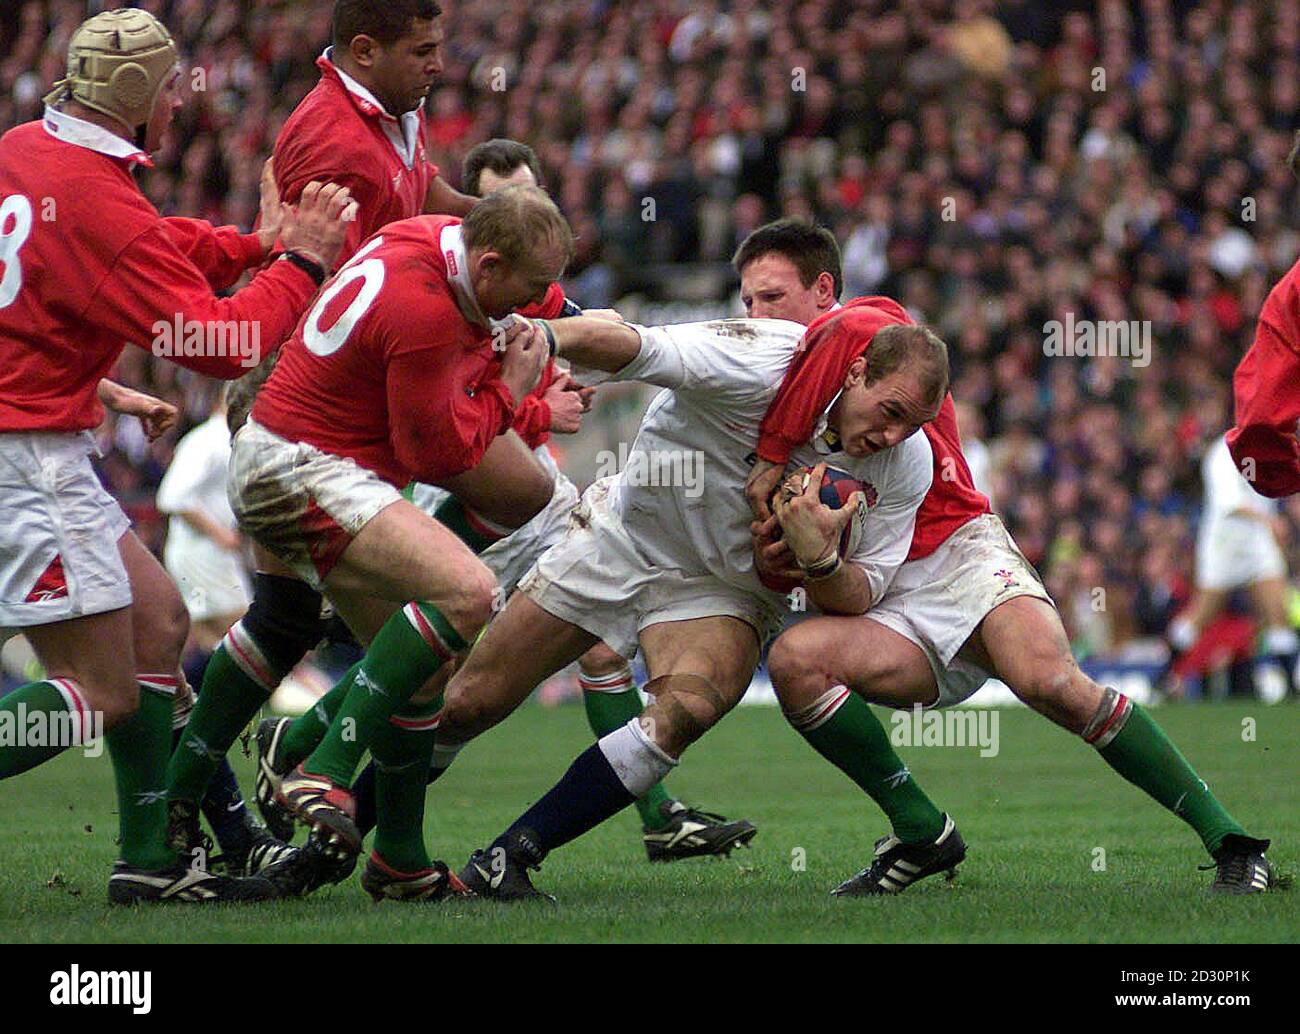 Englands Lawrence Dallaglio powers through the Welsh defence to score a try during the Six Nations rugby match against Wales at Twickenham today Saturday 4 March 2000 which England won 46 - 12 Stock Photo